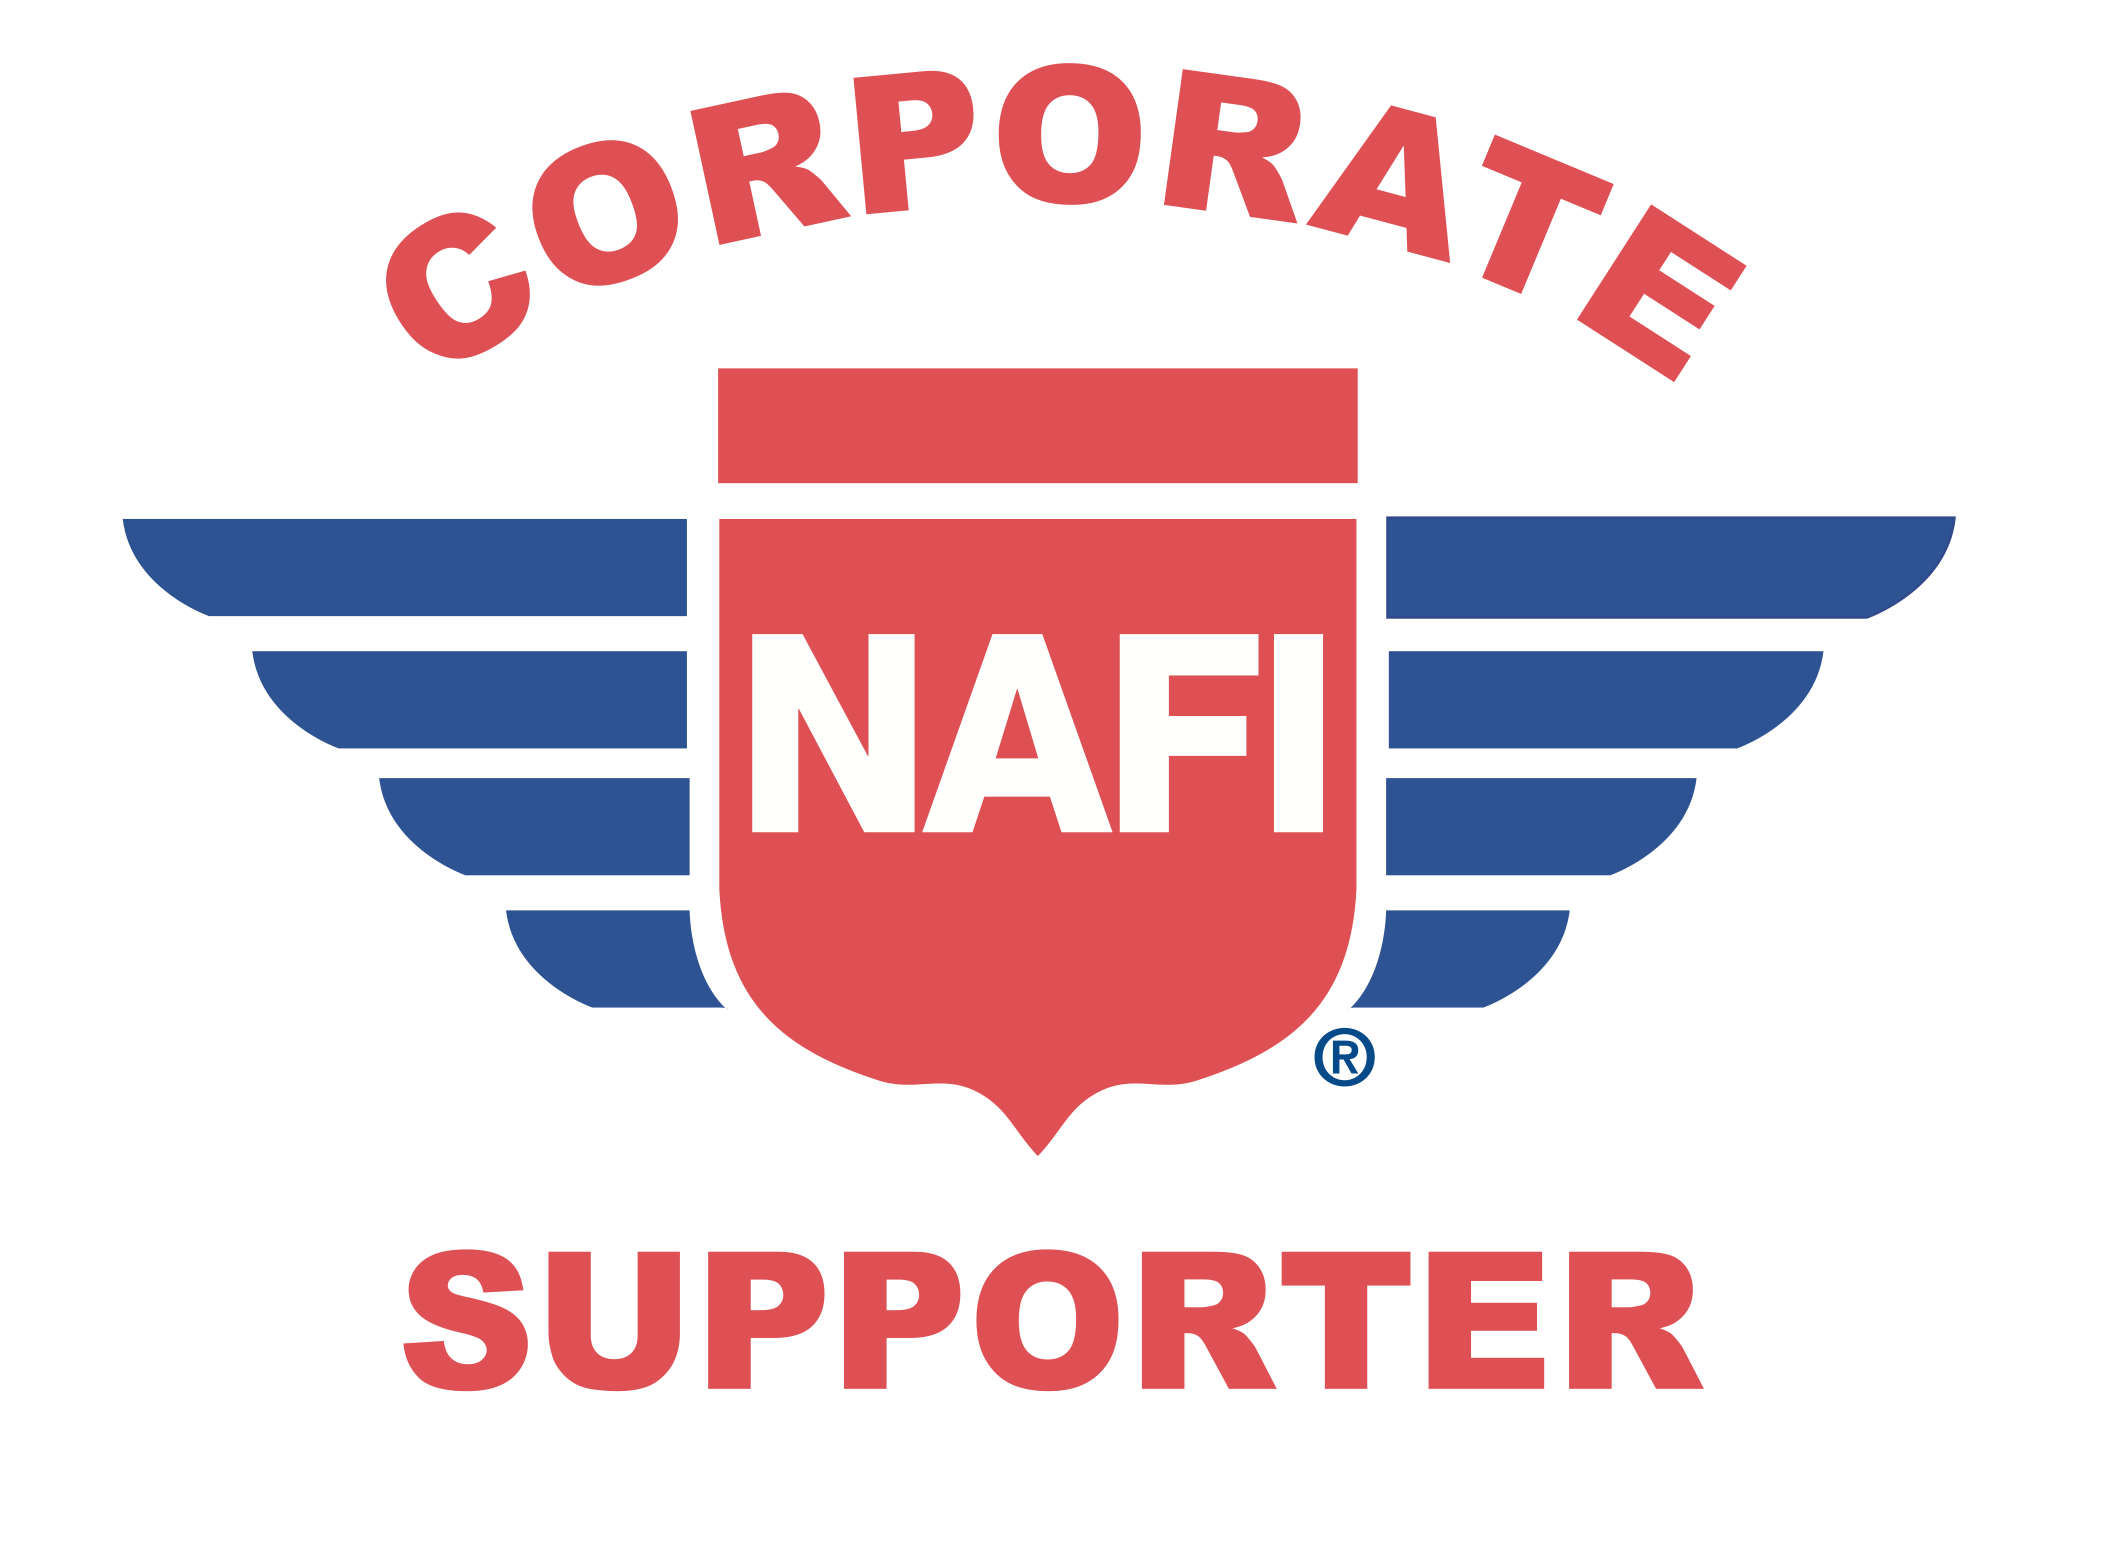 Support corp. Логотип Nafis. Supporters logo. Nafis logo.